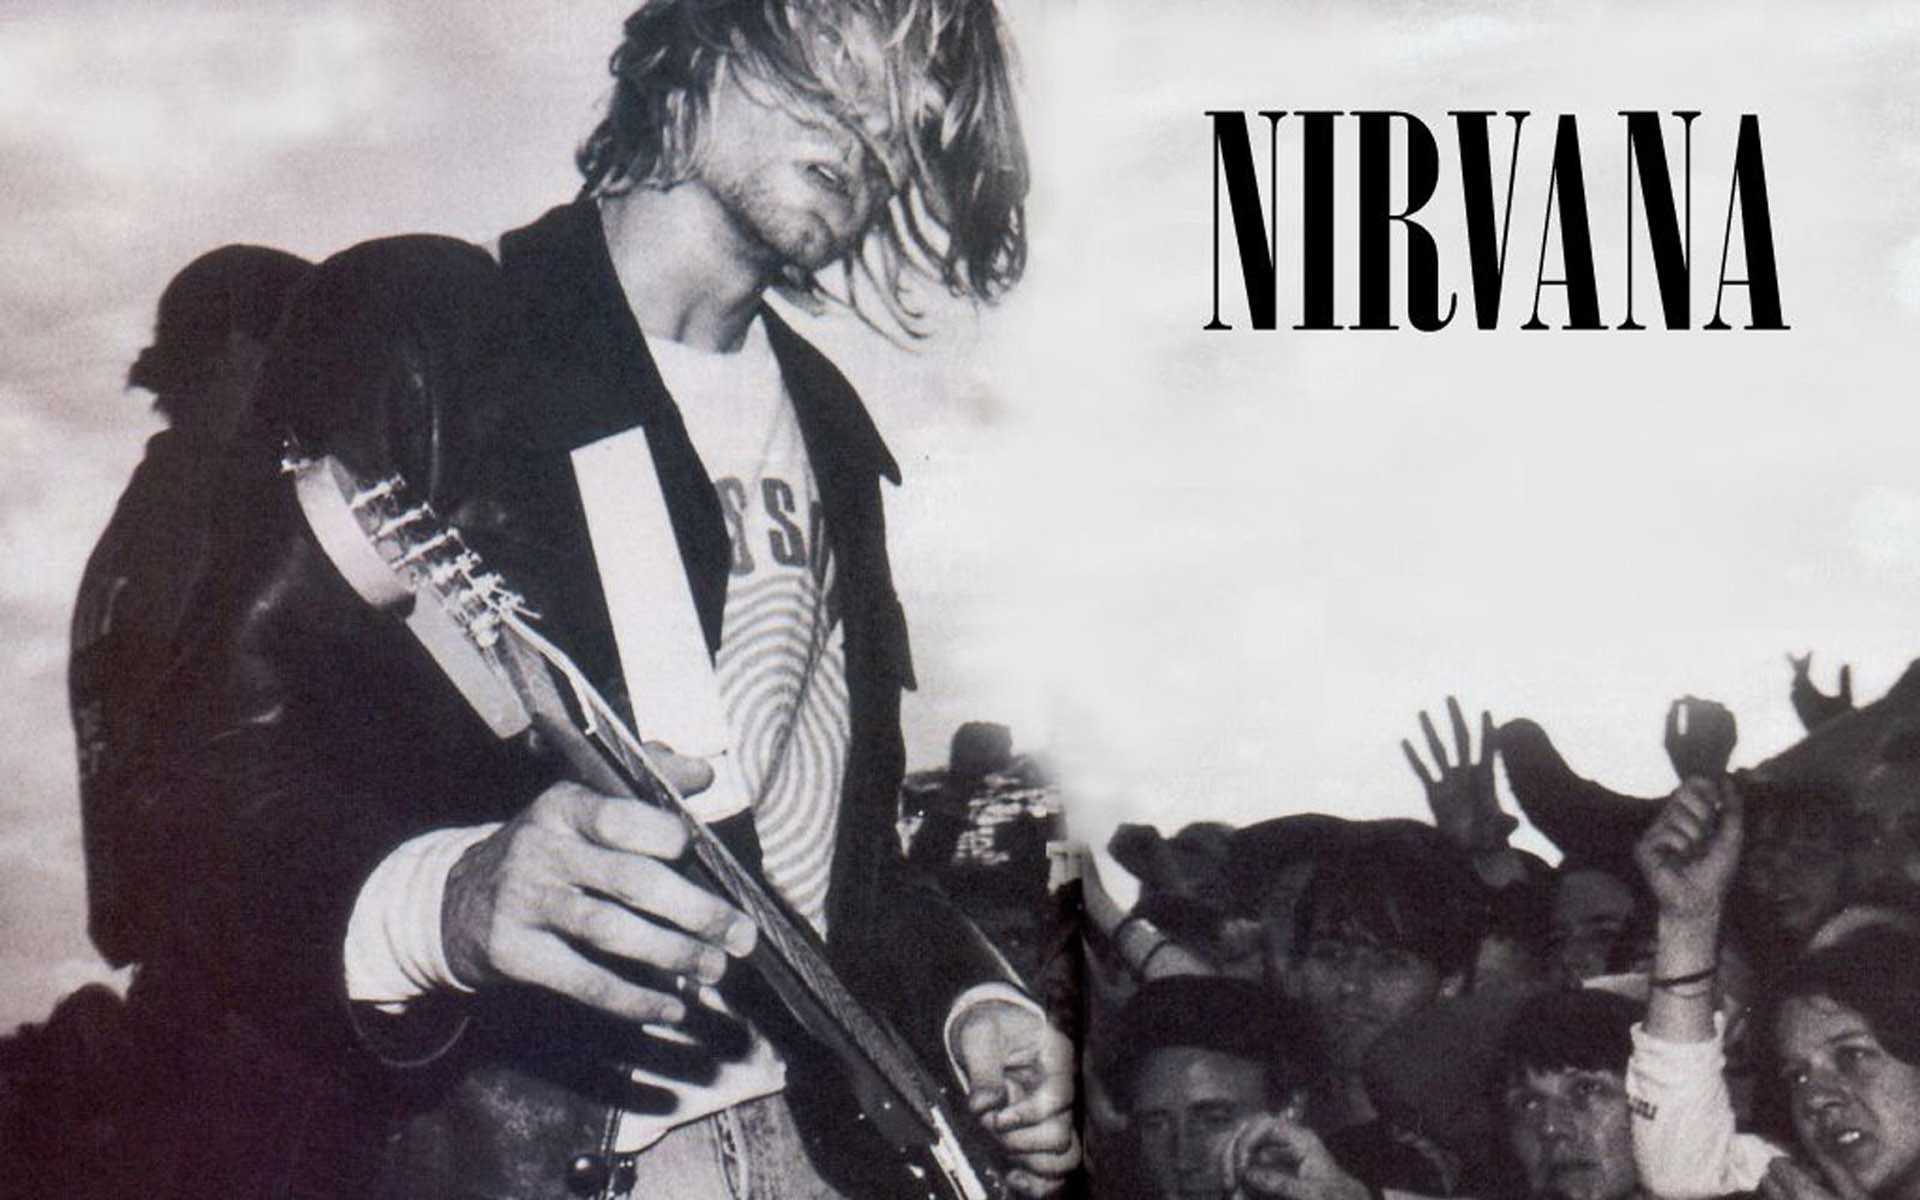 1920x1200 Nirvana Wallpapers HD - Page 3 of 3 - wallpaper.wiki